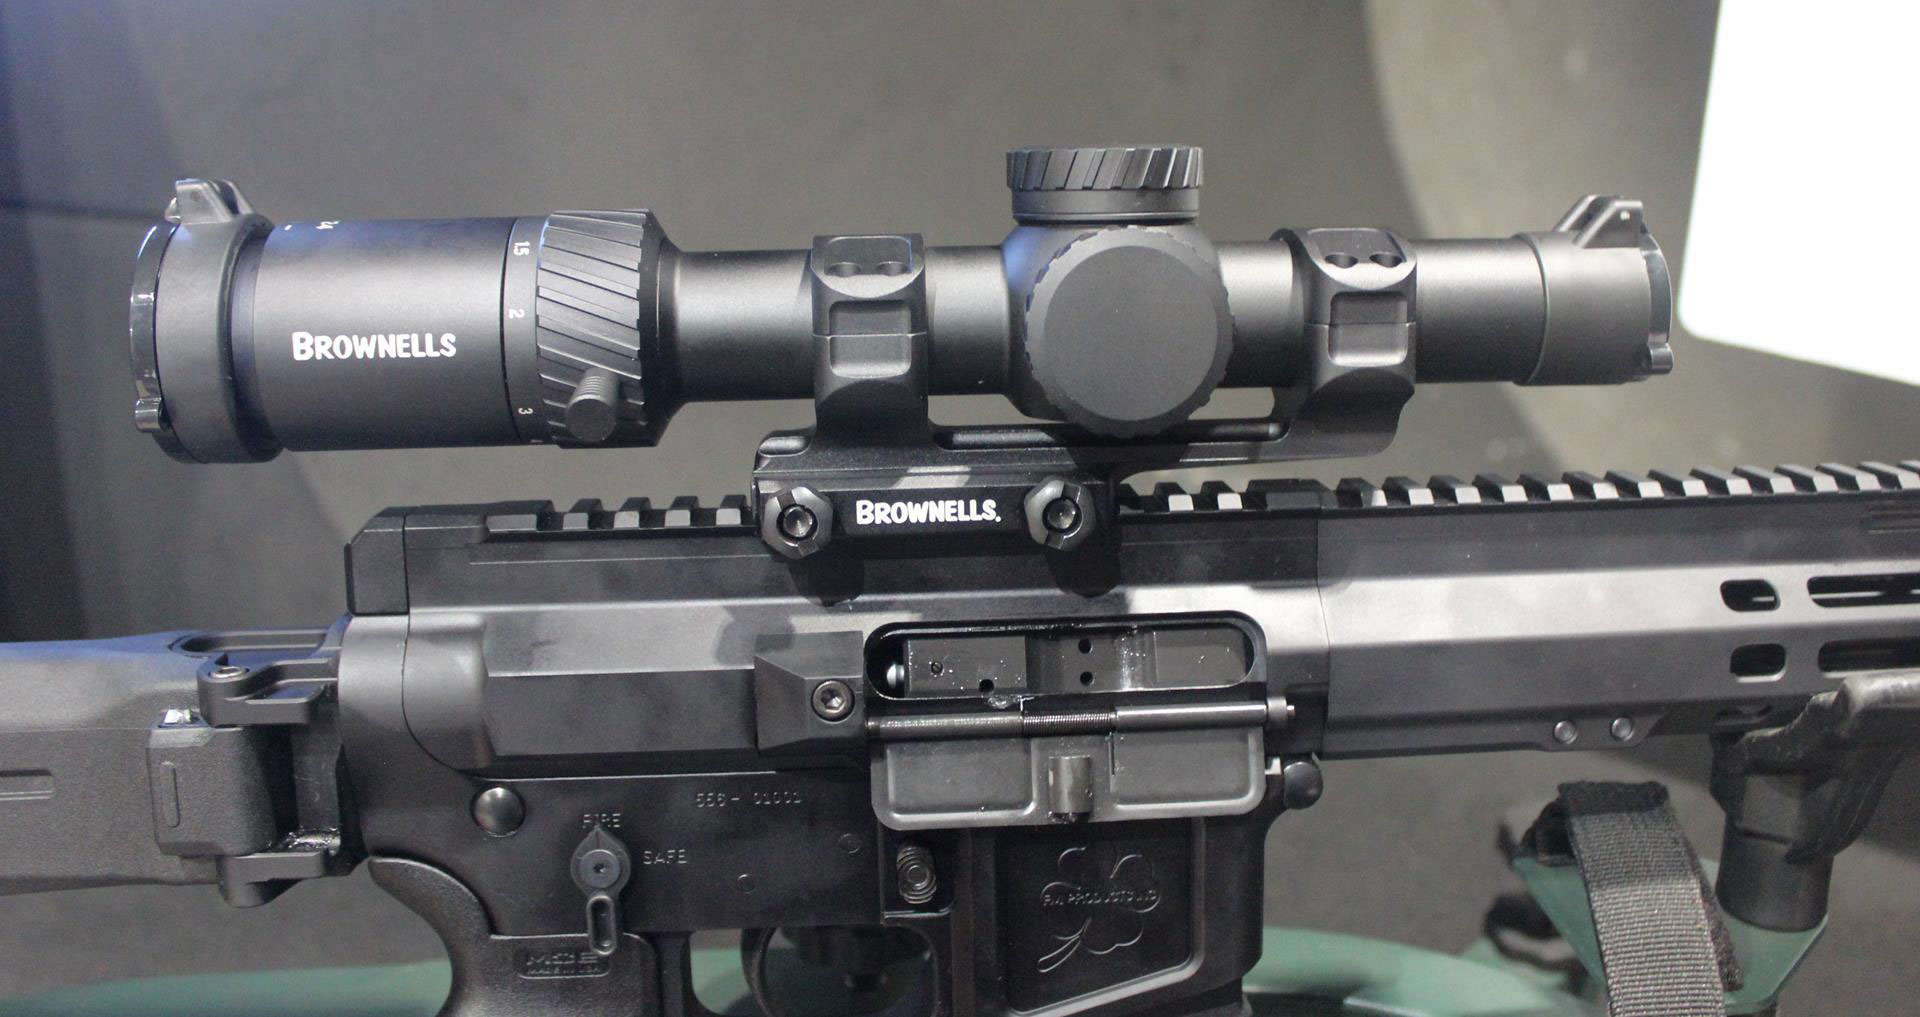 Brownells offers an in-house series of match-grade AR-15 optics.